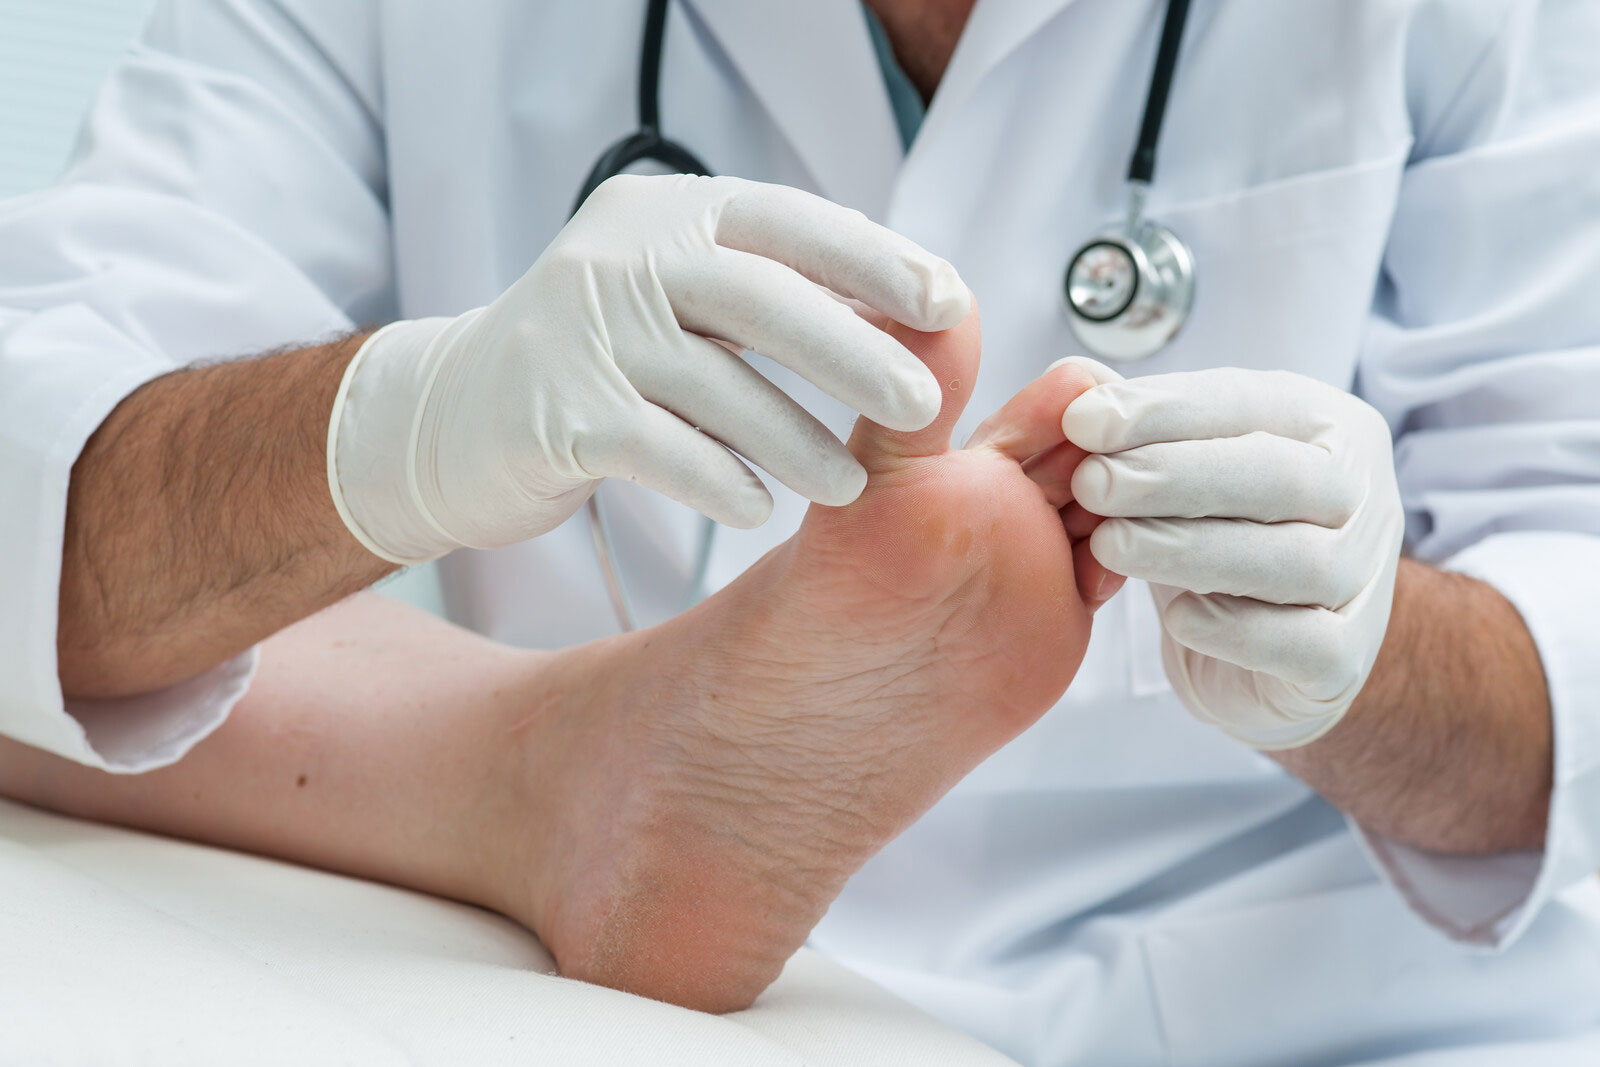 Five Common Foot Problems and Their ICD-10 Codes